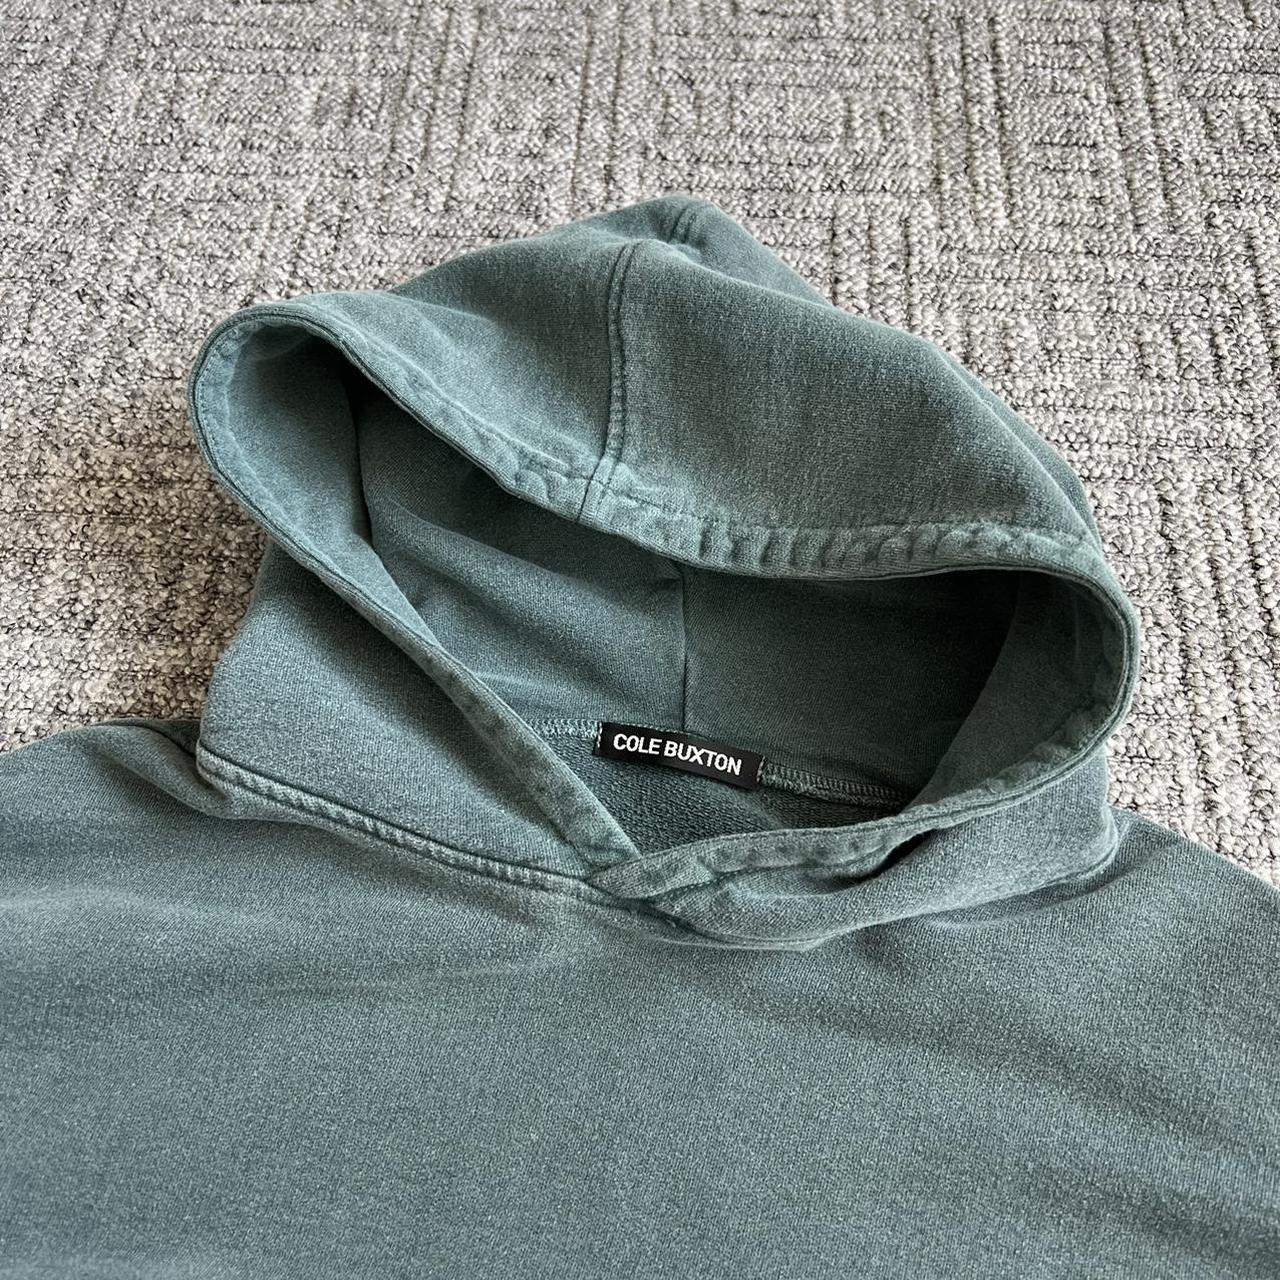 Cole Buxton washed green hoodie. Size XL and in... - Depop